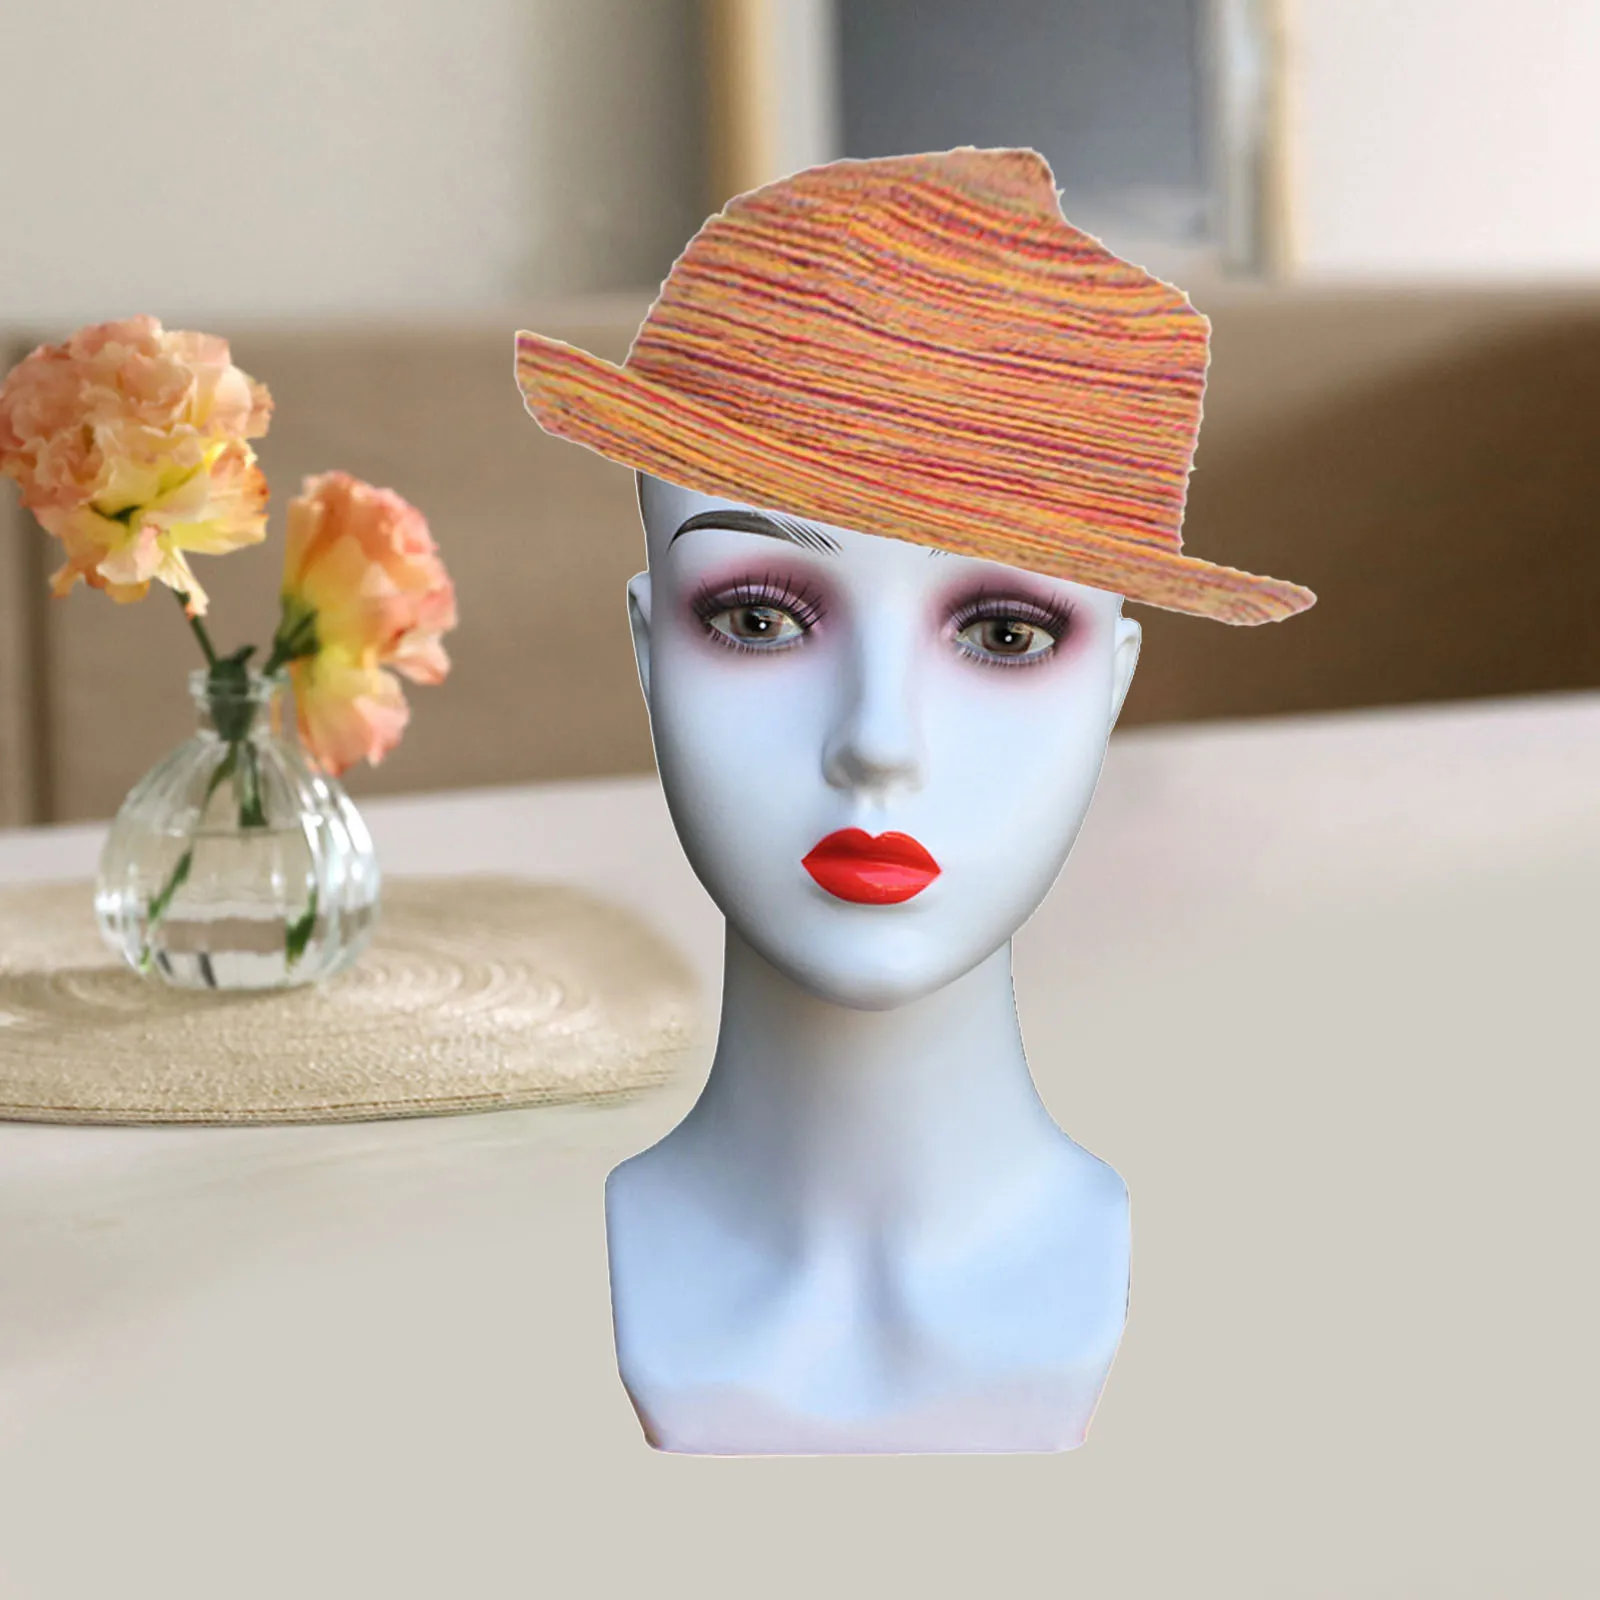 Cheap Mannequin Head Without Shoulders Female Head Model Manikin Mannequin Wig Scarf Glasses Hat Display Stands